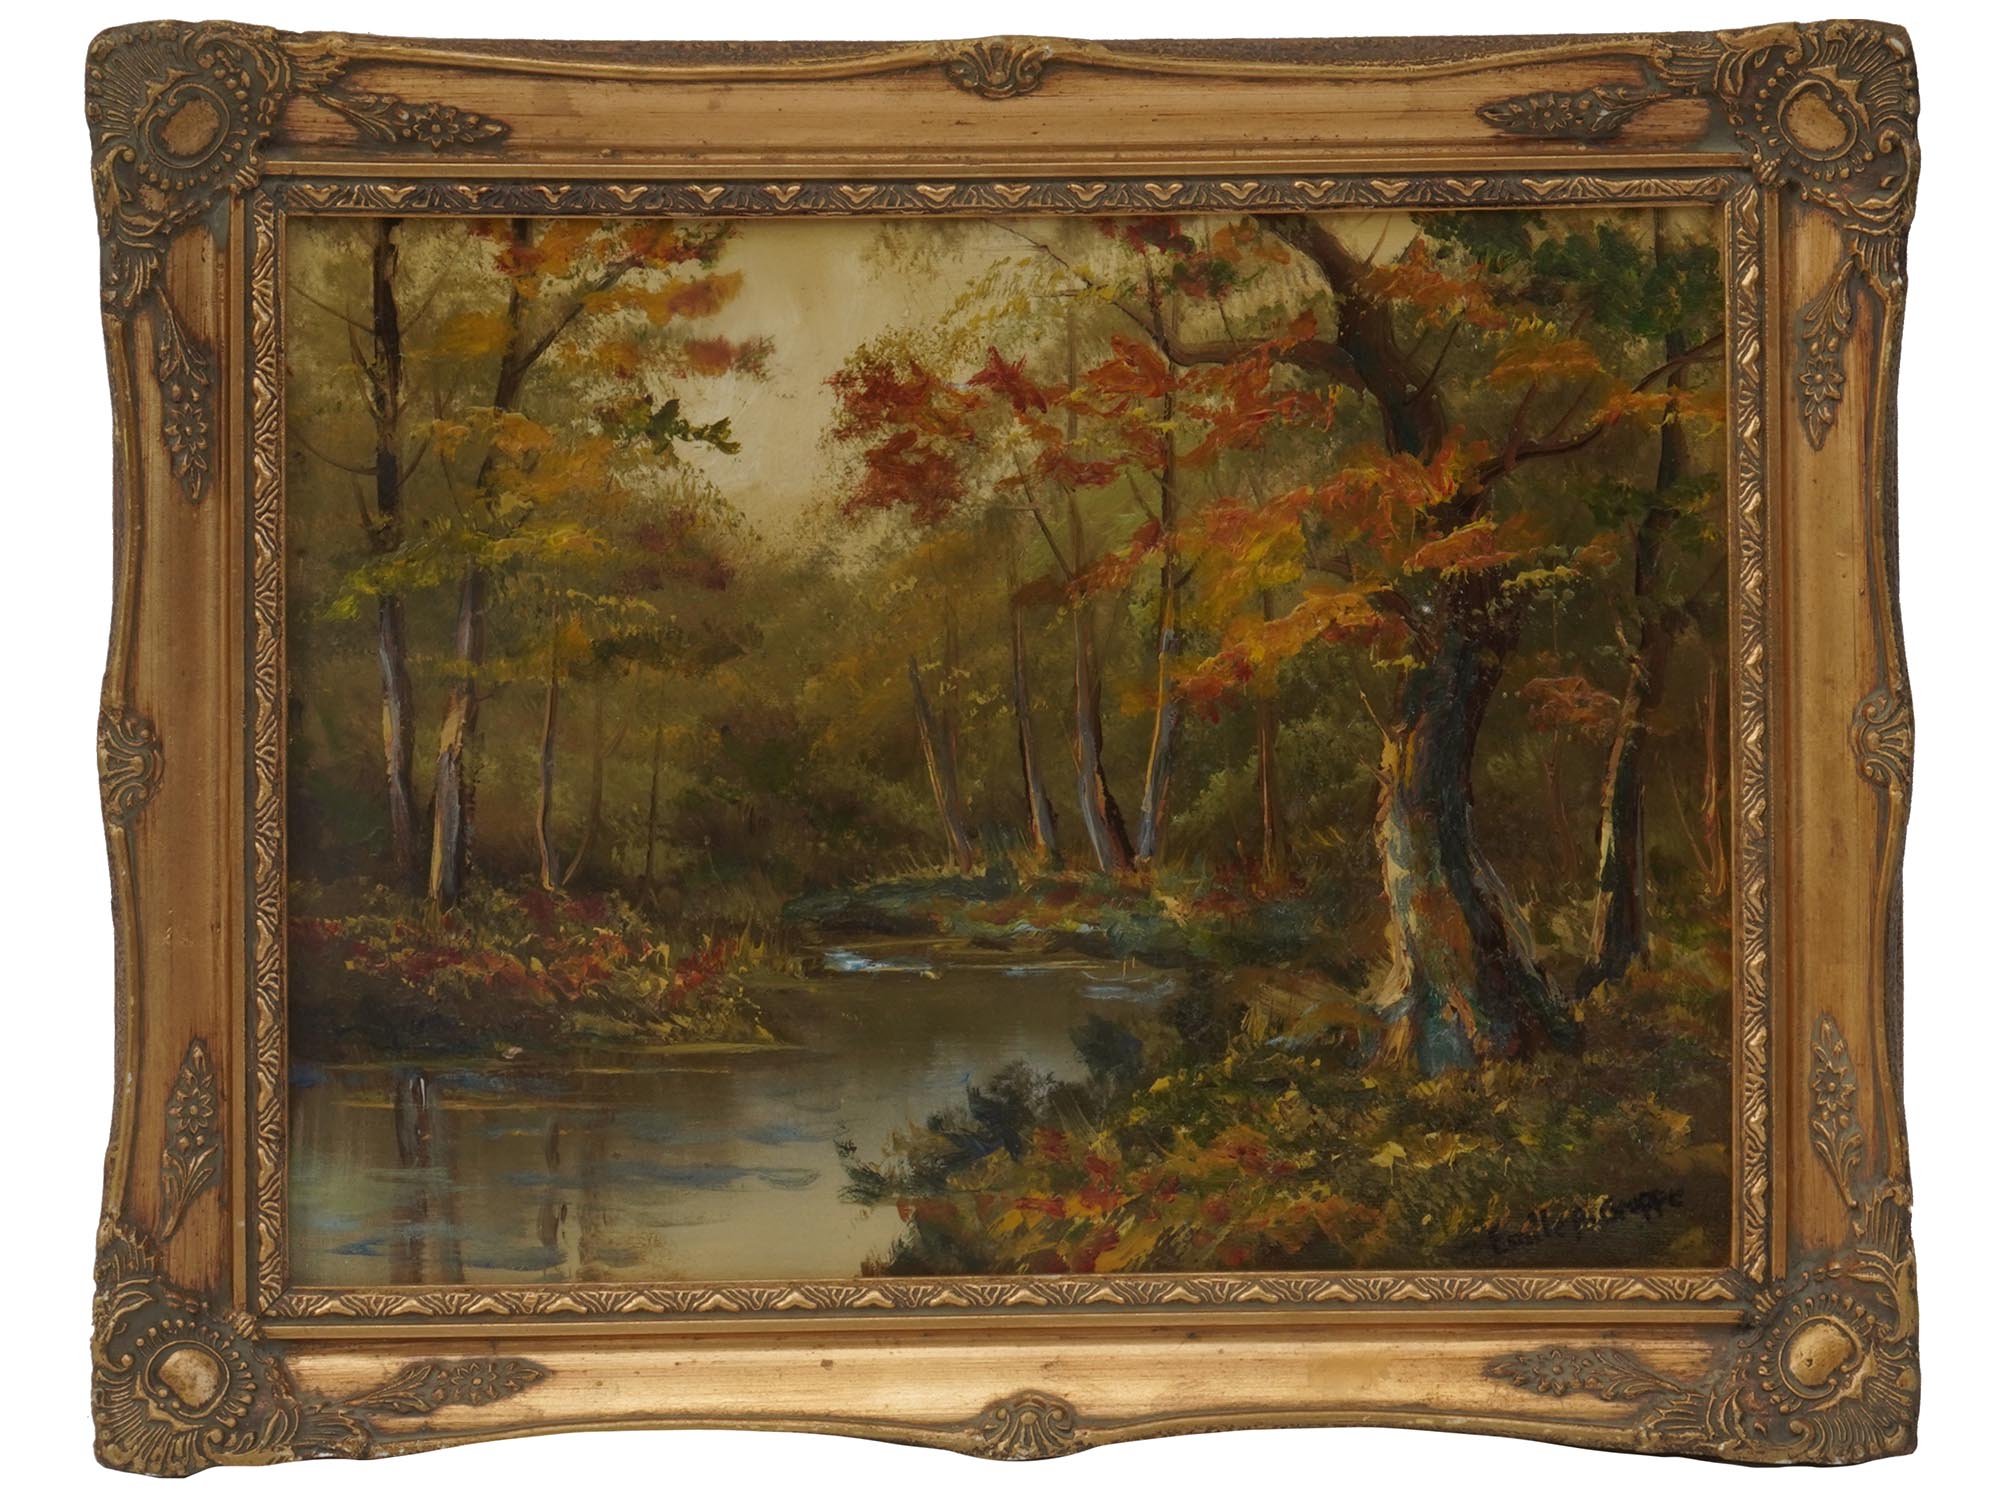 FOREST RIVER LANDSCAPE PAINTING BY EMILE GRUPPE PIC-0